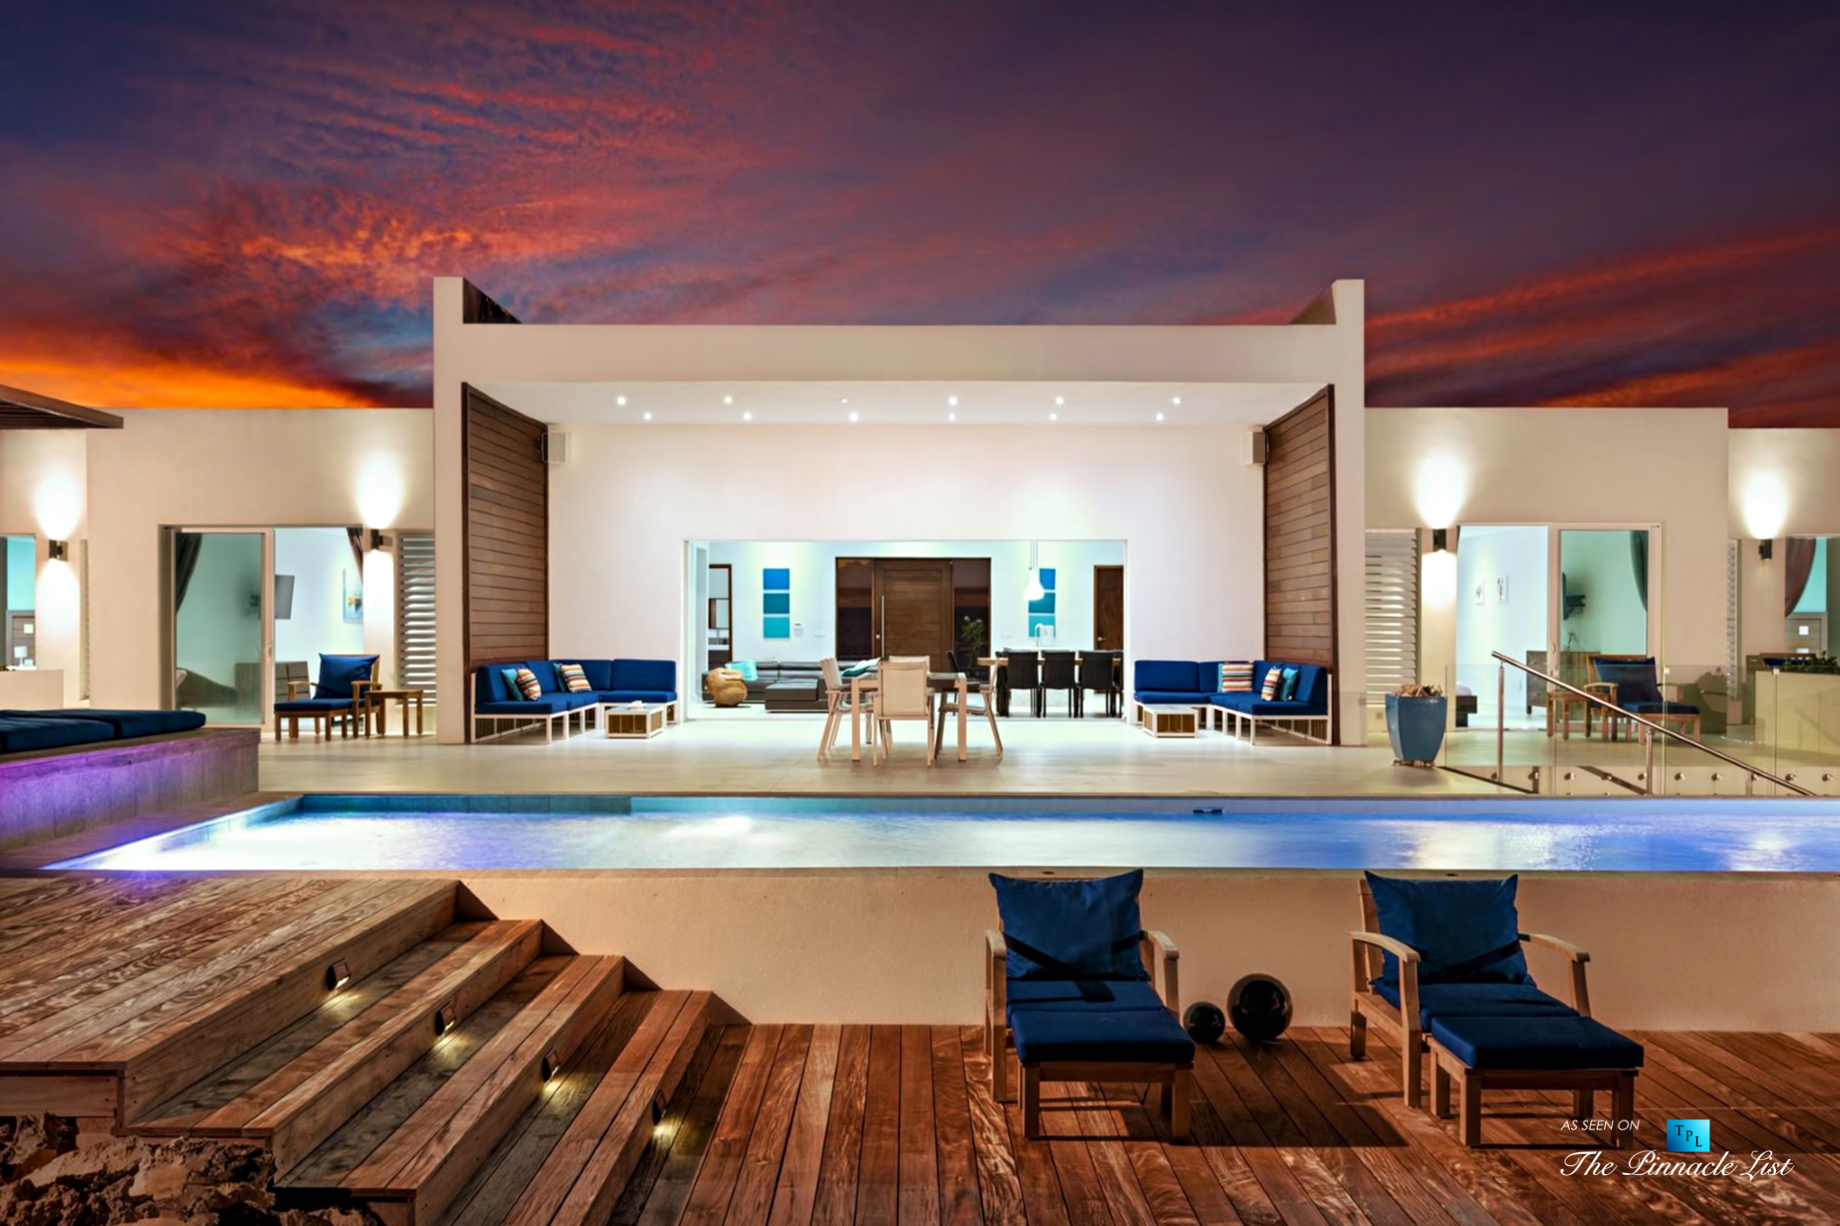 Tip of the Tail Villa – Providenciales, Turks and Caicos Islands – Caribbean Villa Oceanfront Sunset View – Luxury Real Estate – South Shore Peninsula Home